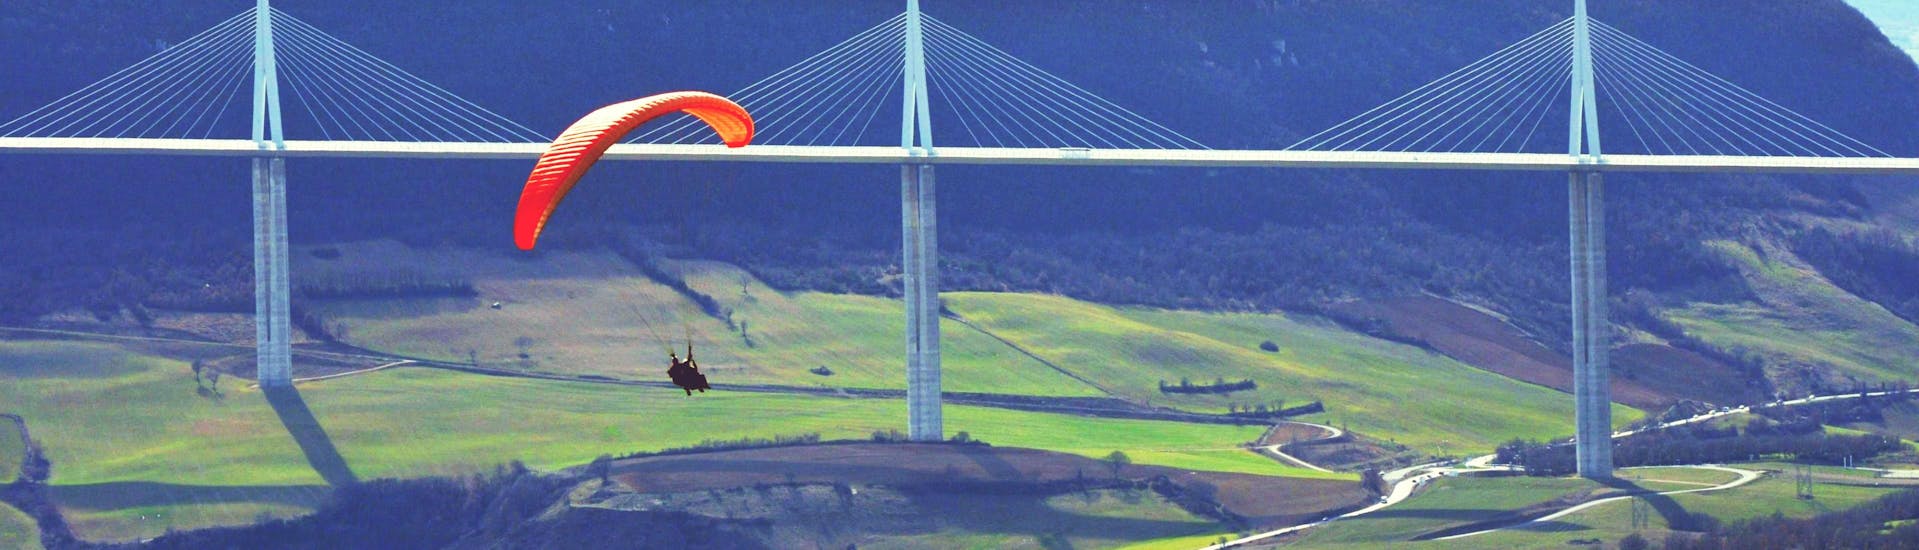 A paragliding pilot from Air Magic Parapente is doing a Tandem Paragliding Flight "XL" in front of the Millau Viaduct.